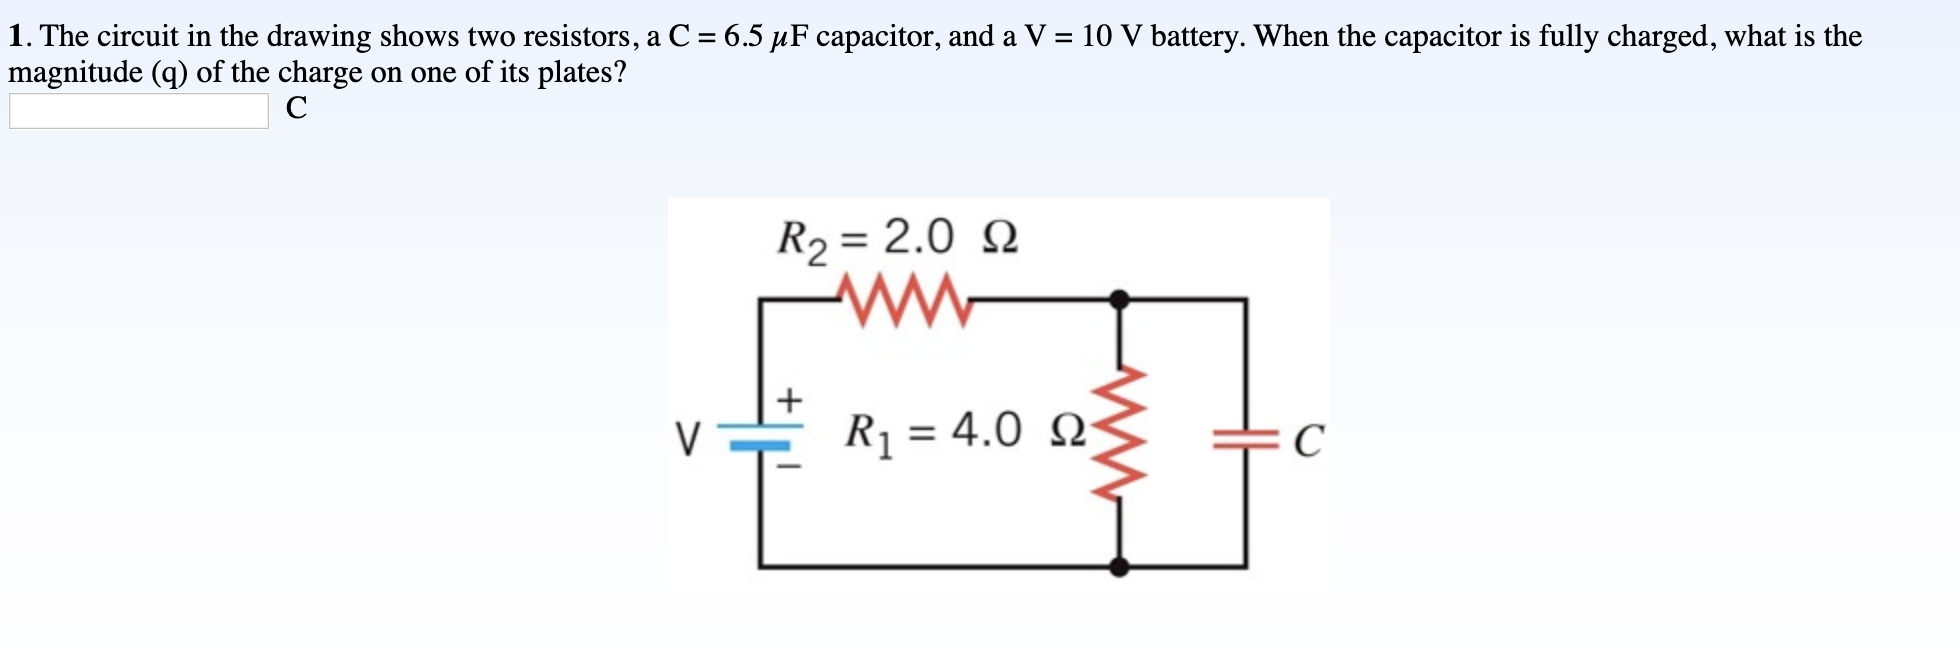 When the capacitor is fully charged, what is... 